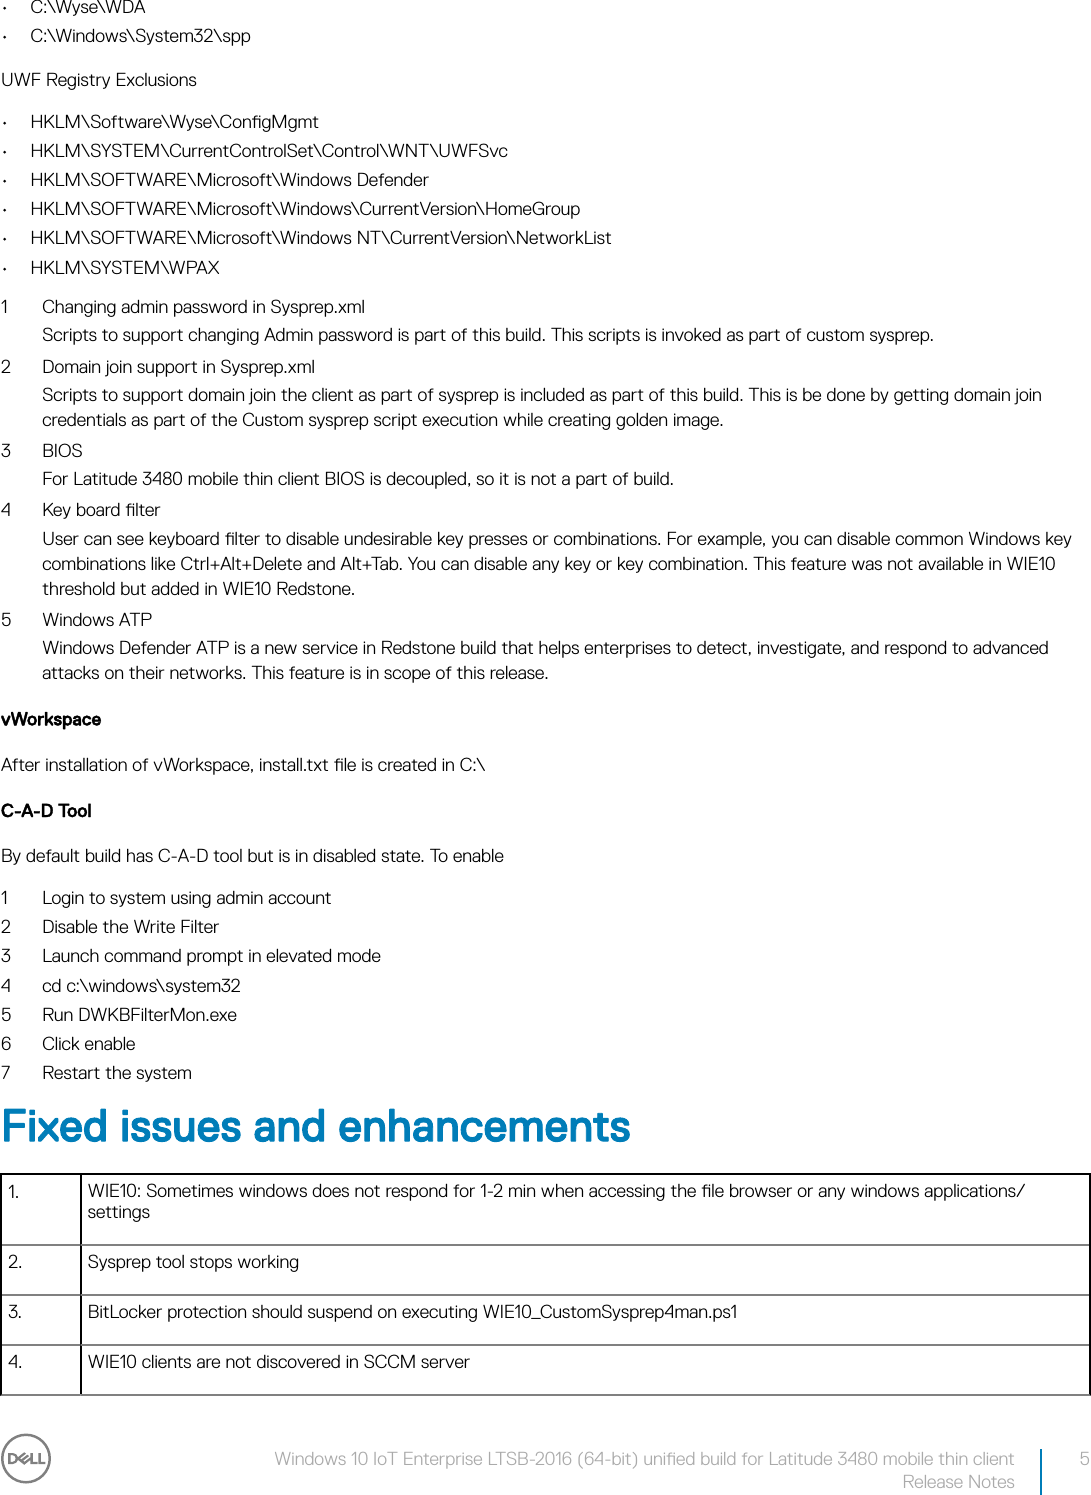 Page 5 of 12 - Dell Wyse-3480-mobile-thin-client Windows 10 IoT Enterprise LTSB-2016 (64-bit) Unified Build For Latitude 3480 Mobile Thin Client Release Notes User Manual  - Io T N Notes2 En-us